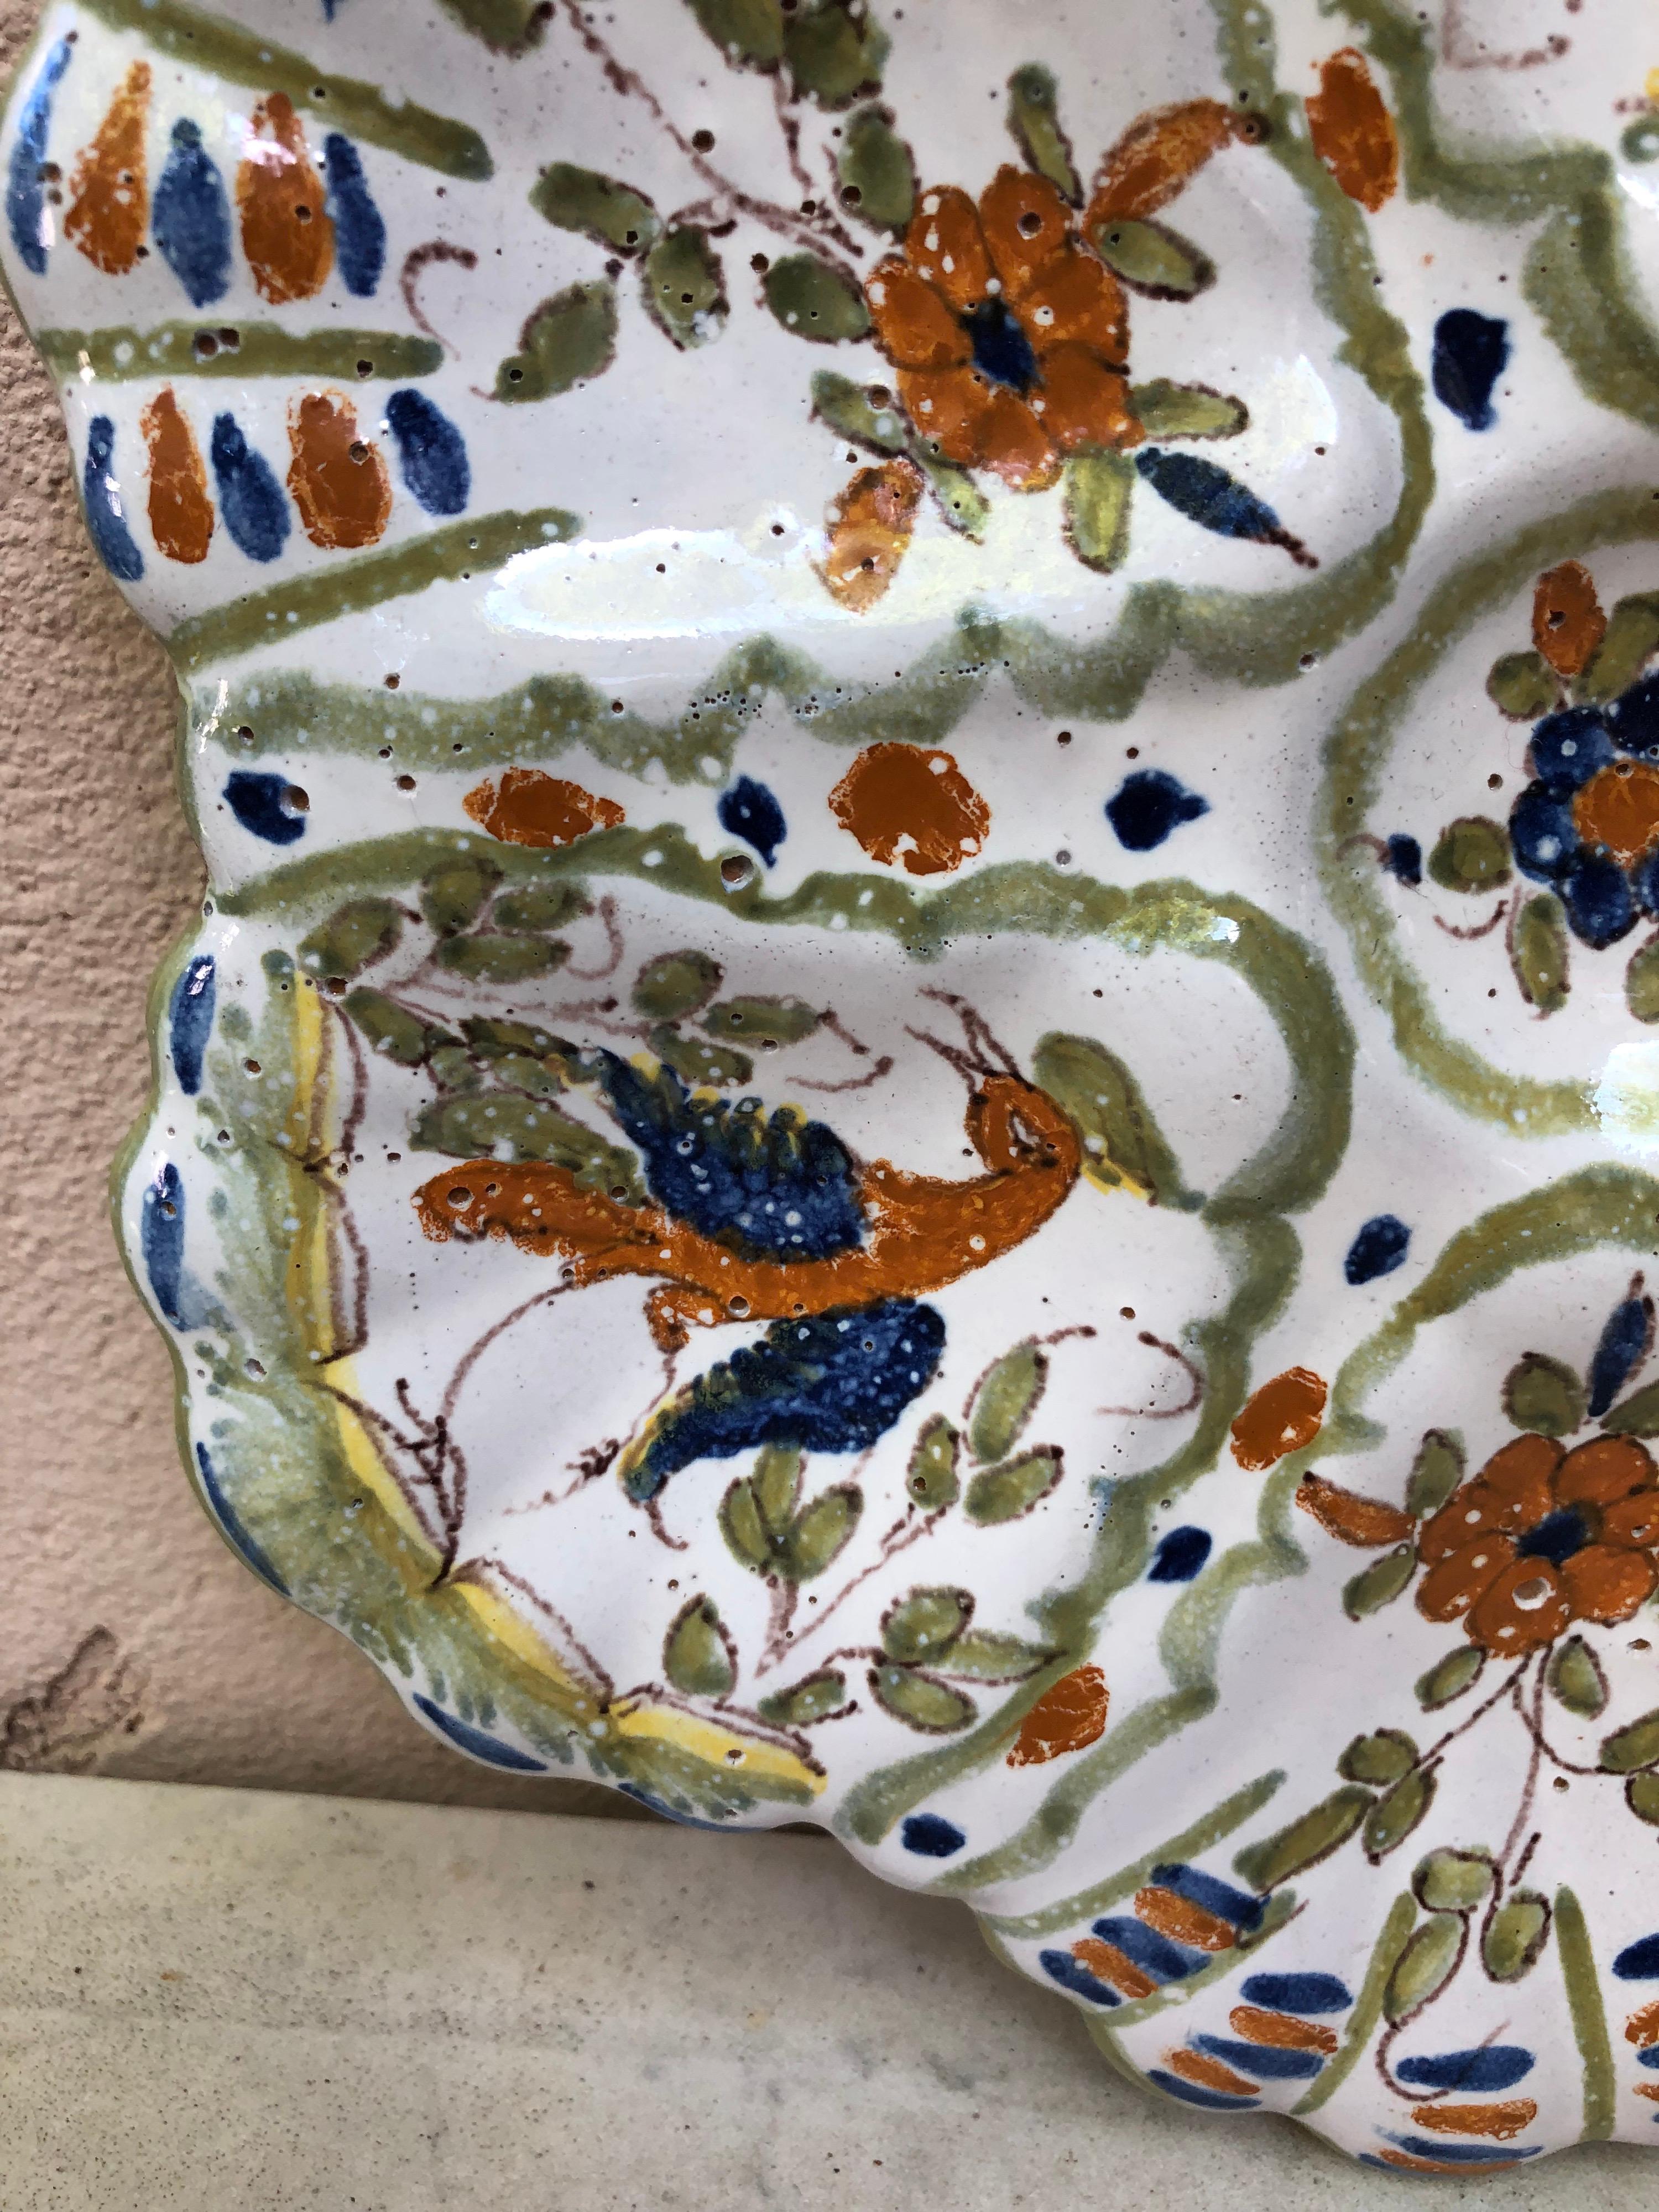 French Faience rustic oyster plate Moustiers style, circa 1940.
Painting of birds and flower on the center.